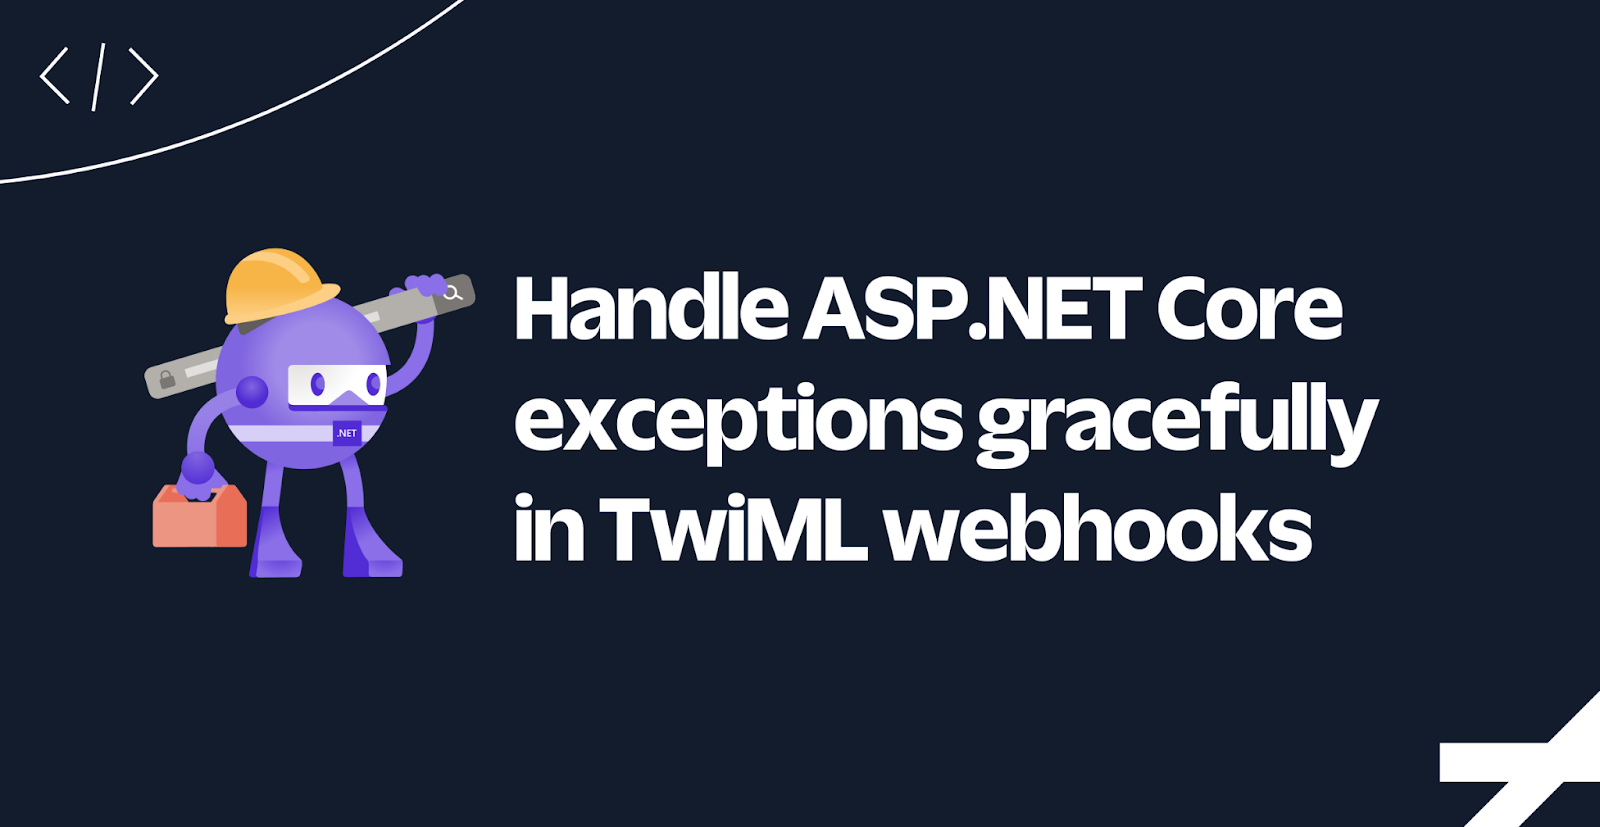 Handle ASP.NET Core exceptions gracefully in TwiML webhooks